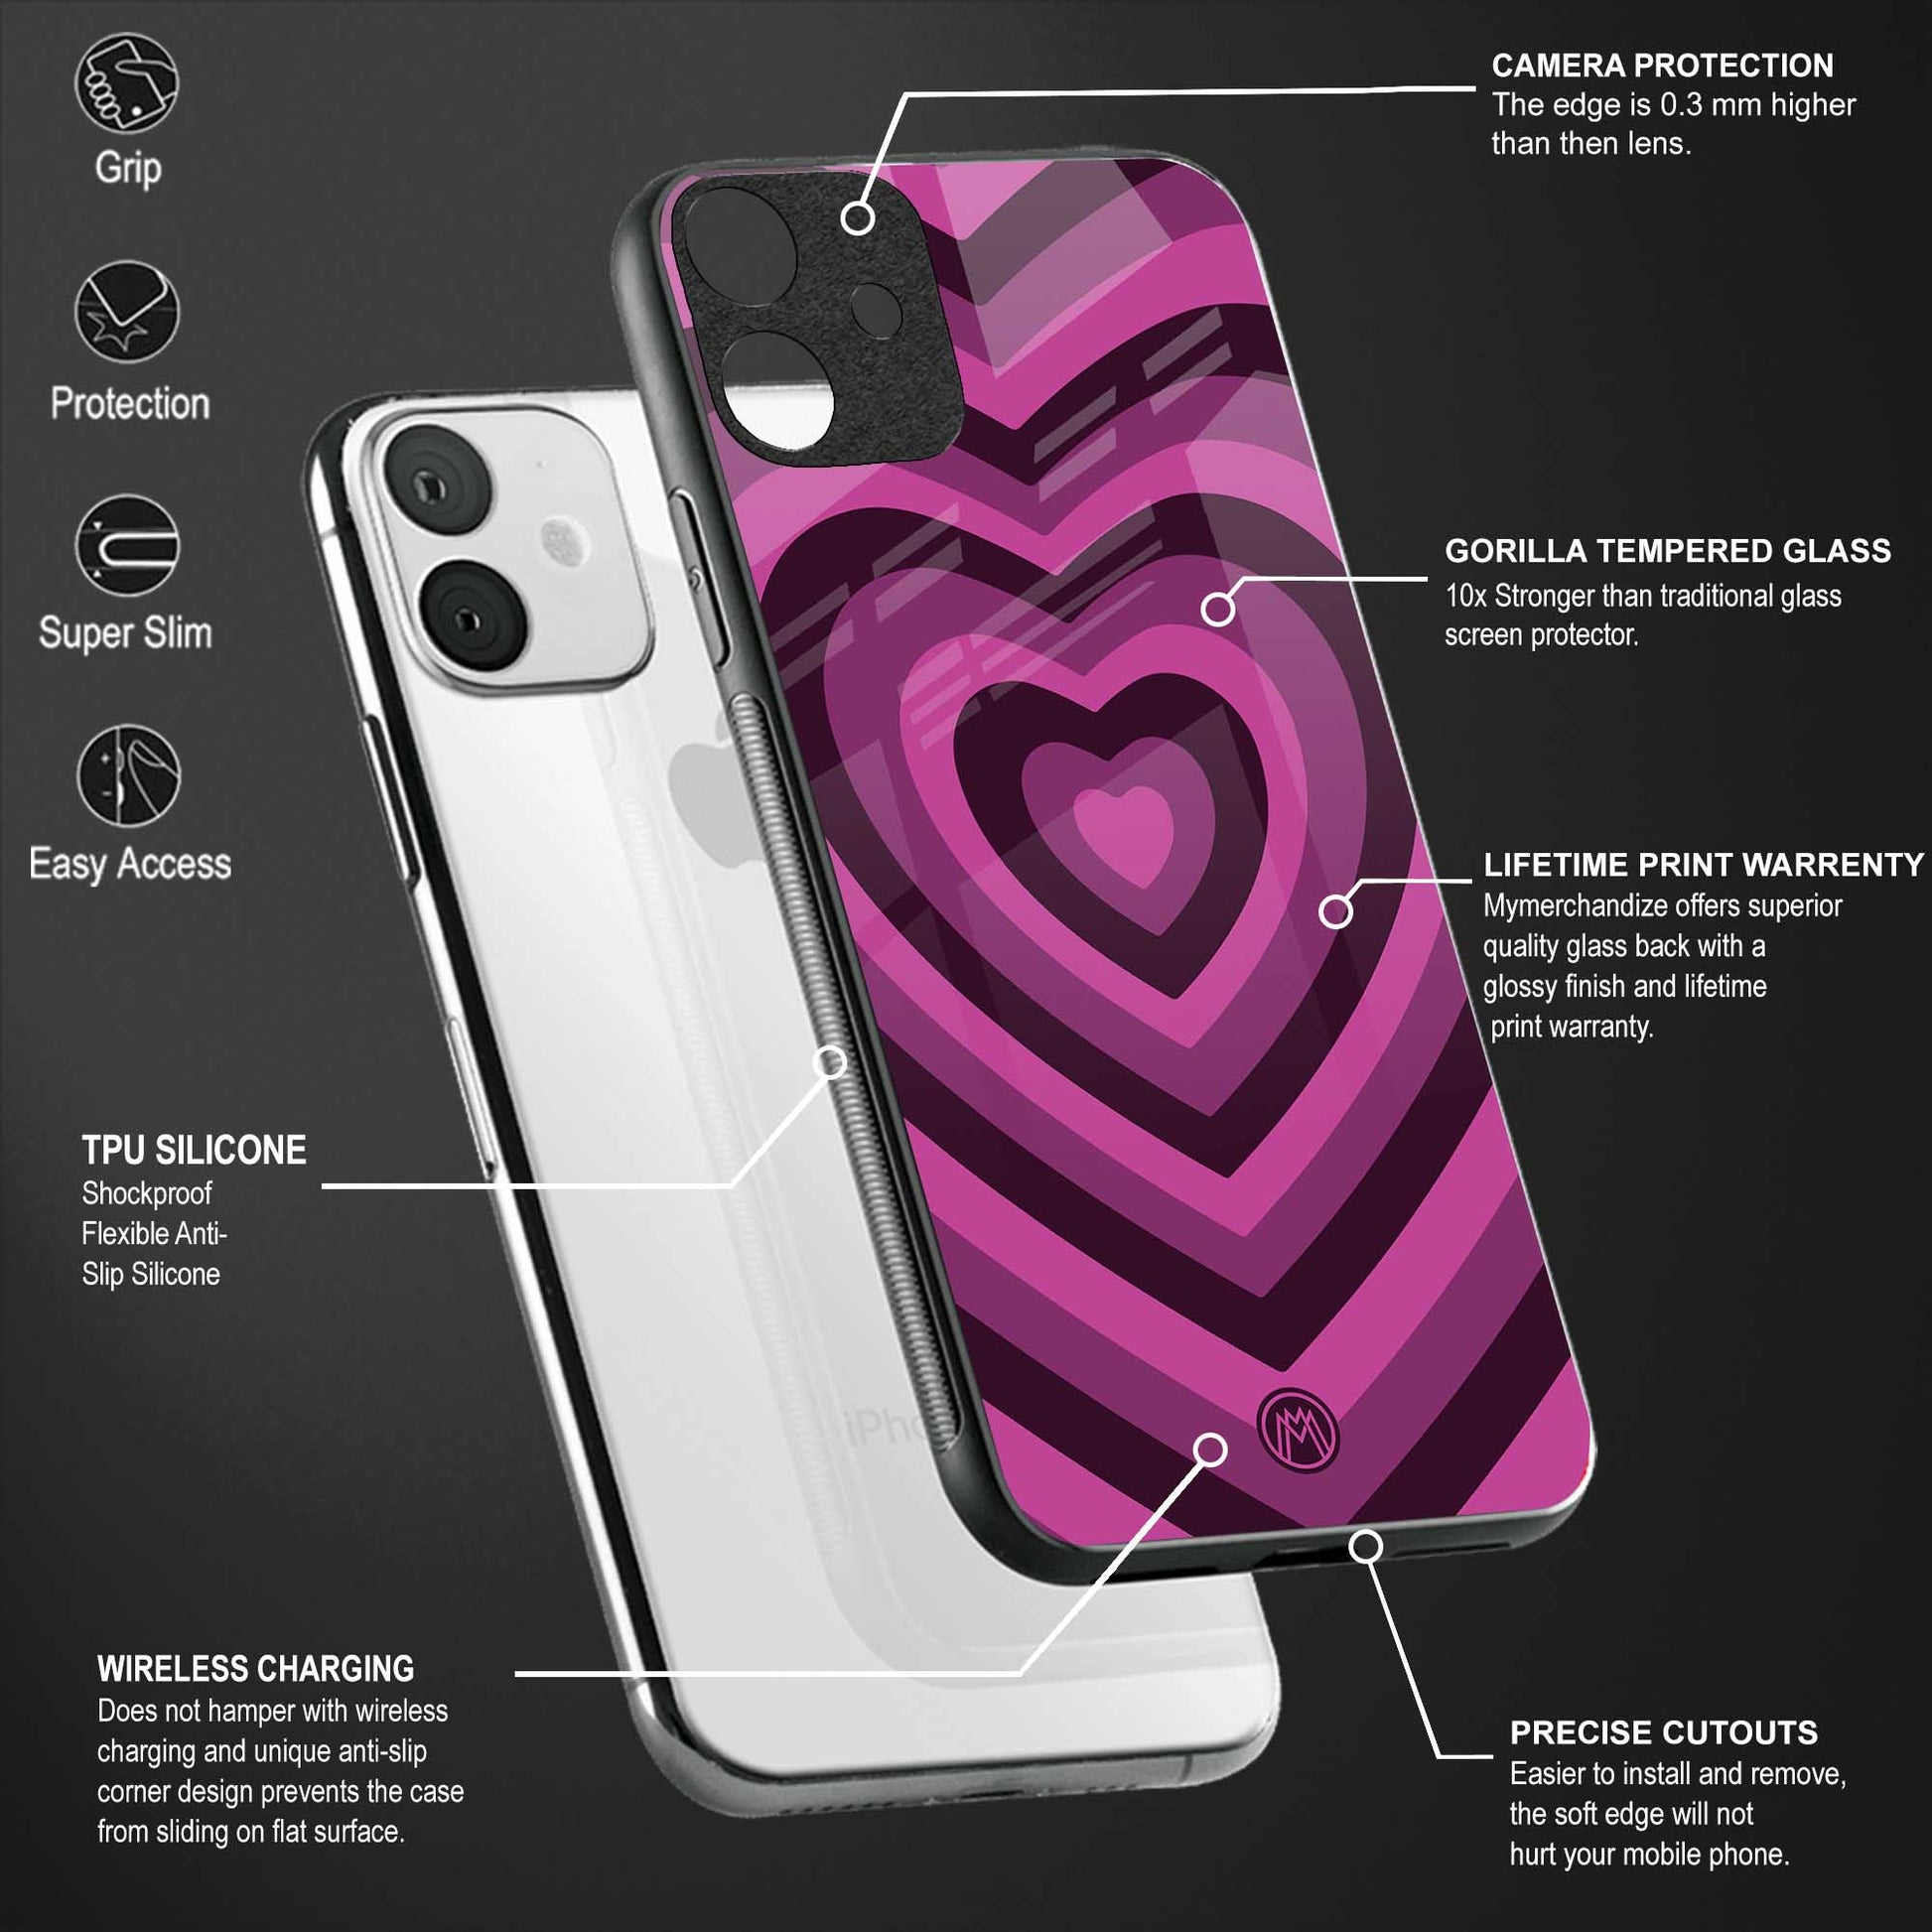 y2k burgundy hearts aesthetic back phone cover | glass case for oneplus 10t